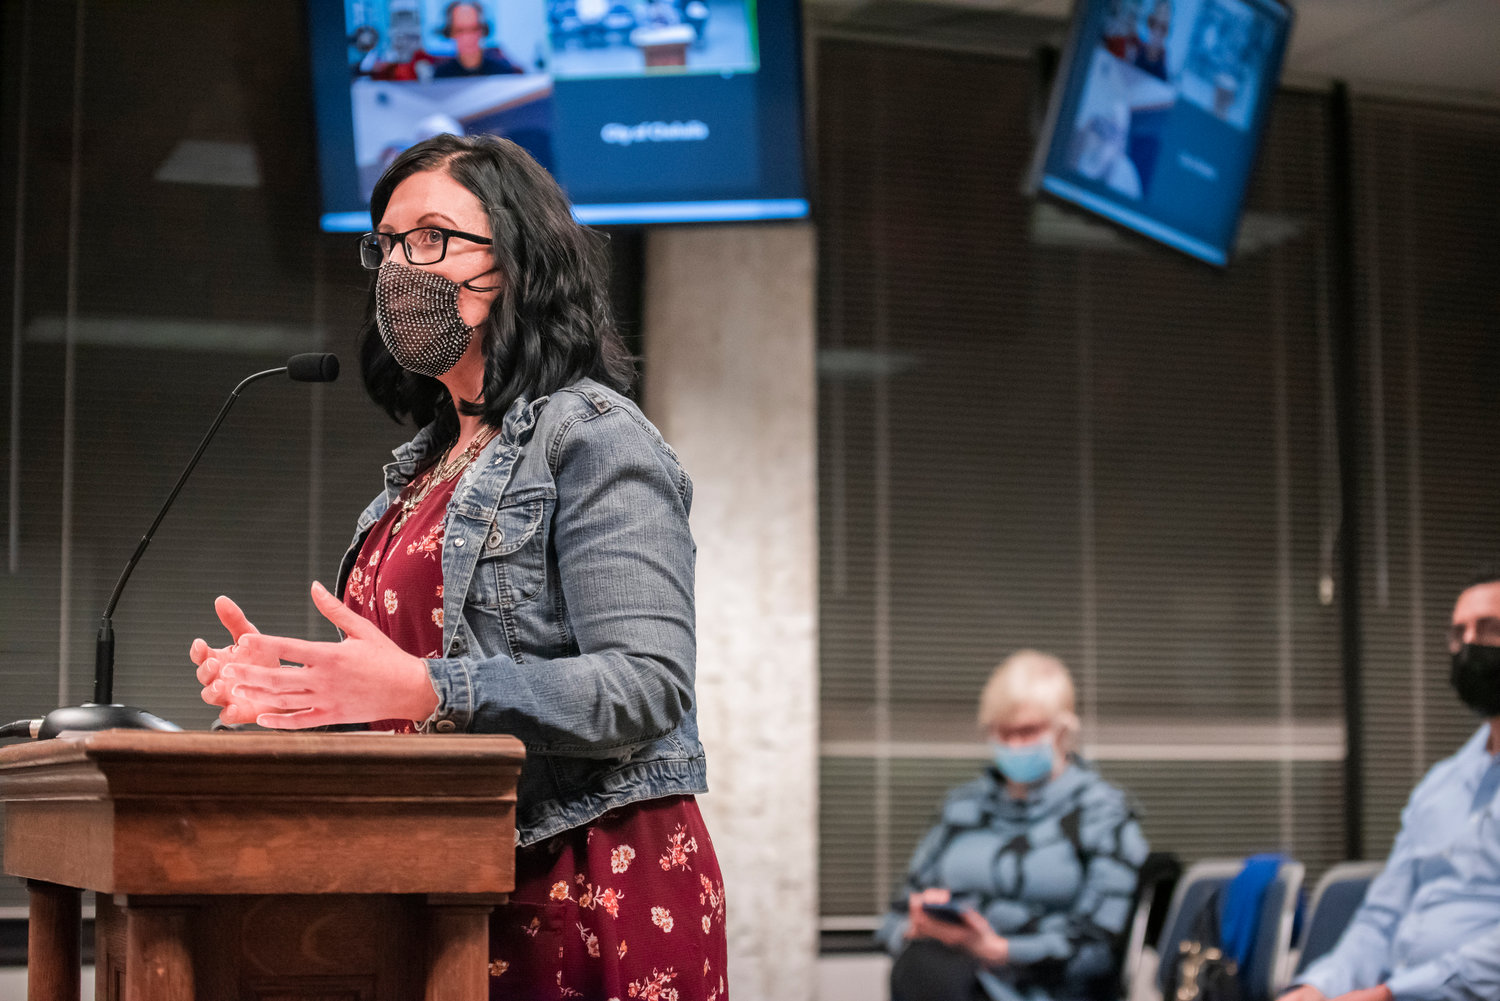 Tricia Ziese talks about Lewis County Gospel Mission and recent flooding in and around the building Monday evening during a Chehalis City Council meeting.